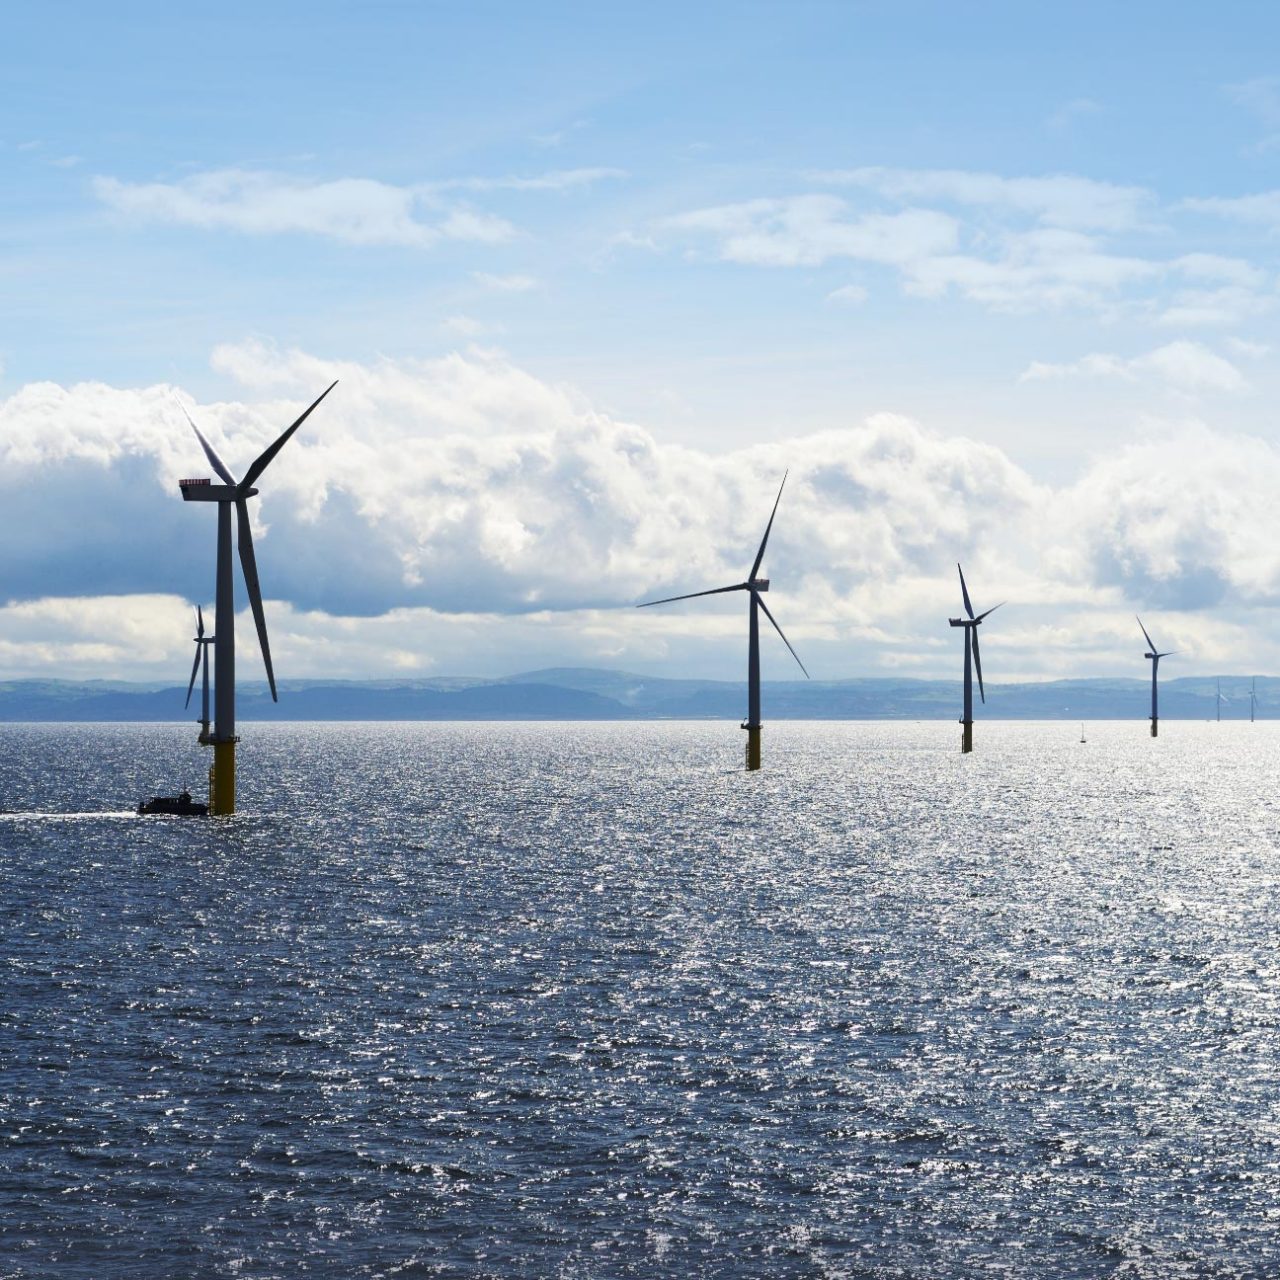 Array of wind turbines and small boat in the sea against blue sky and white clouds